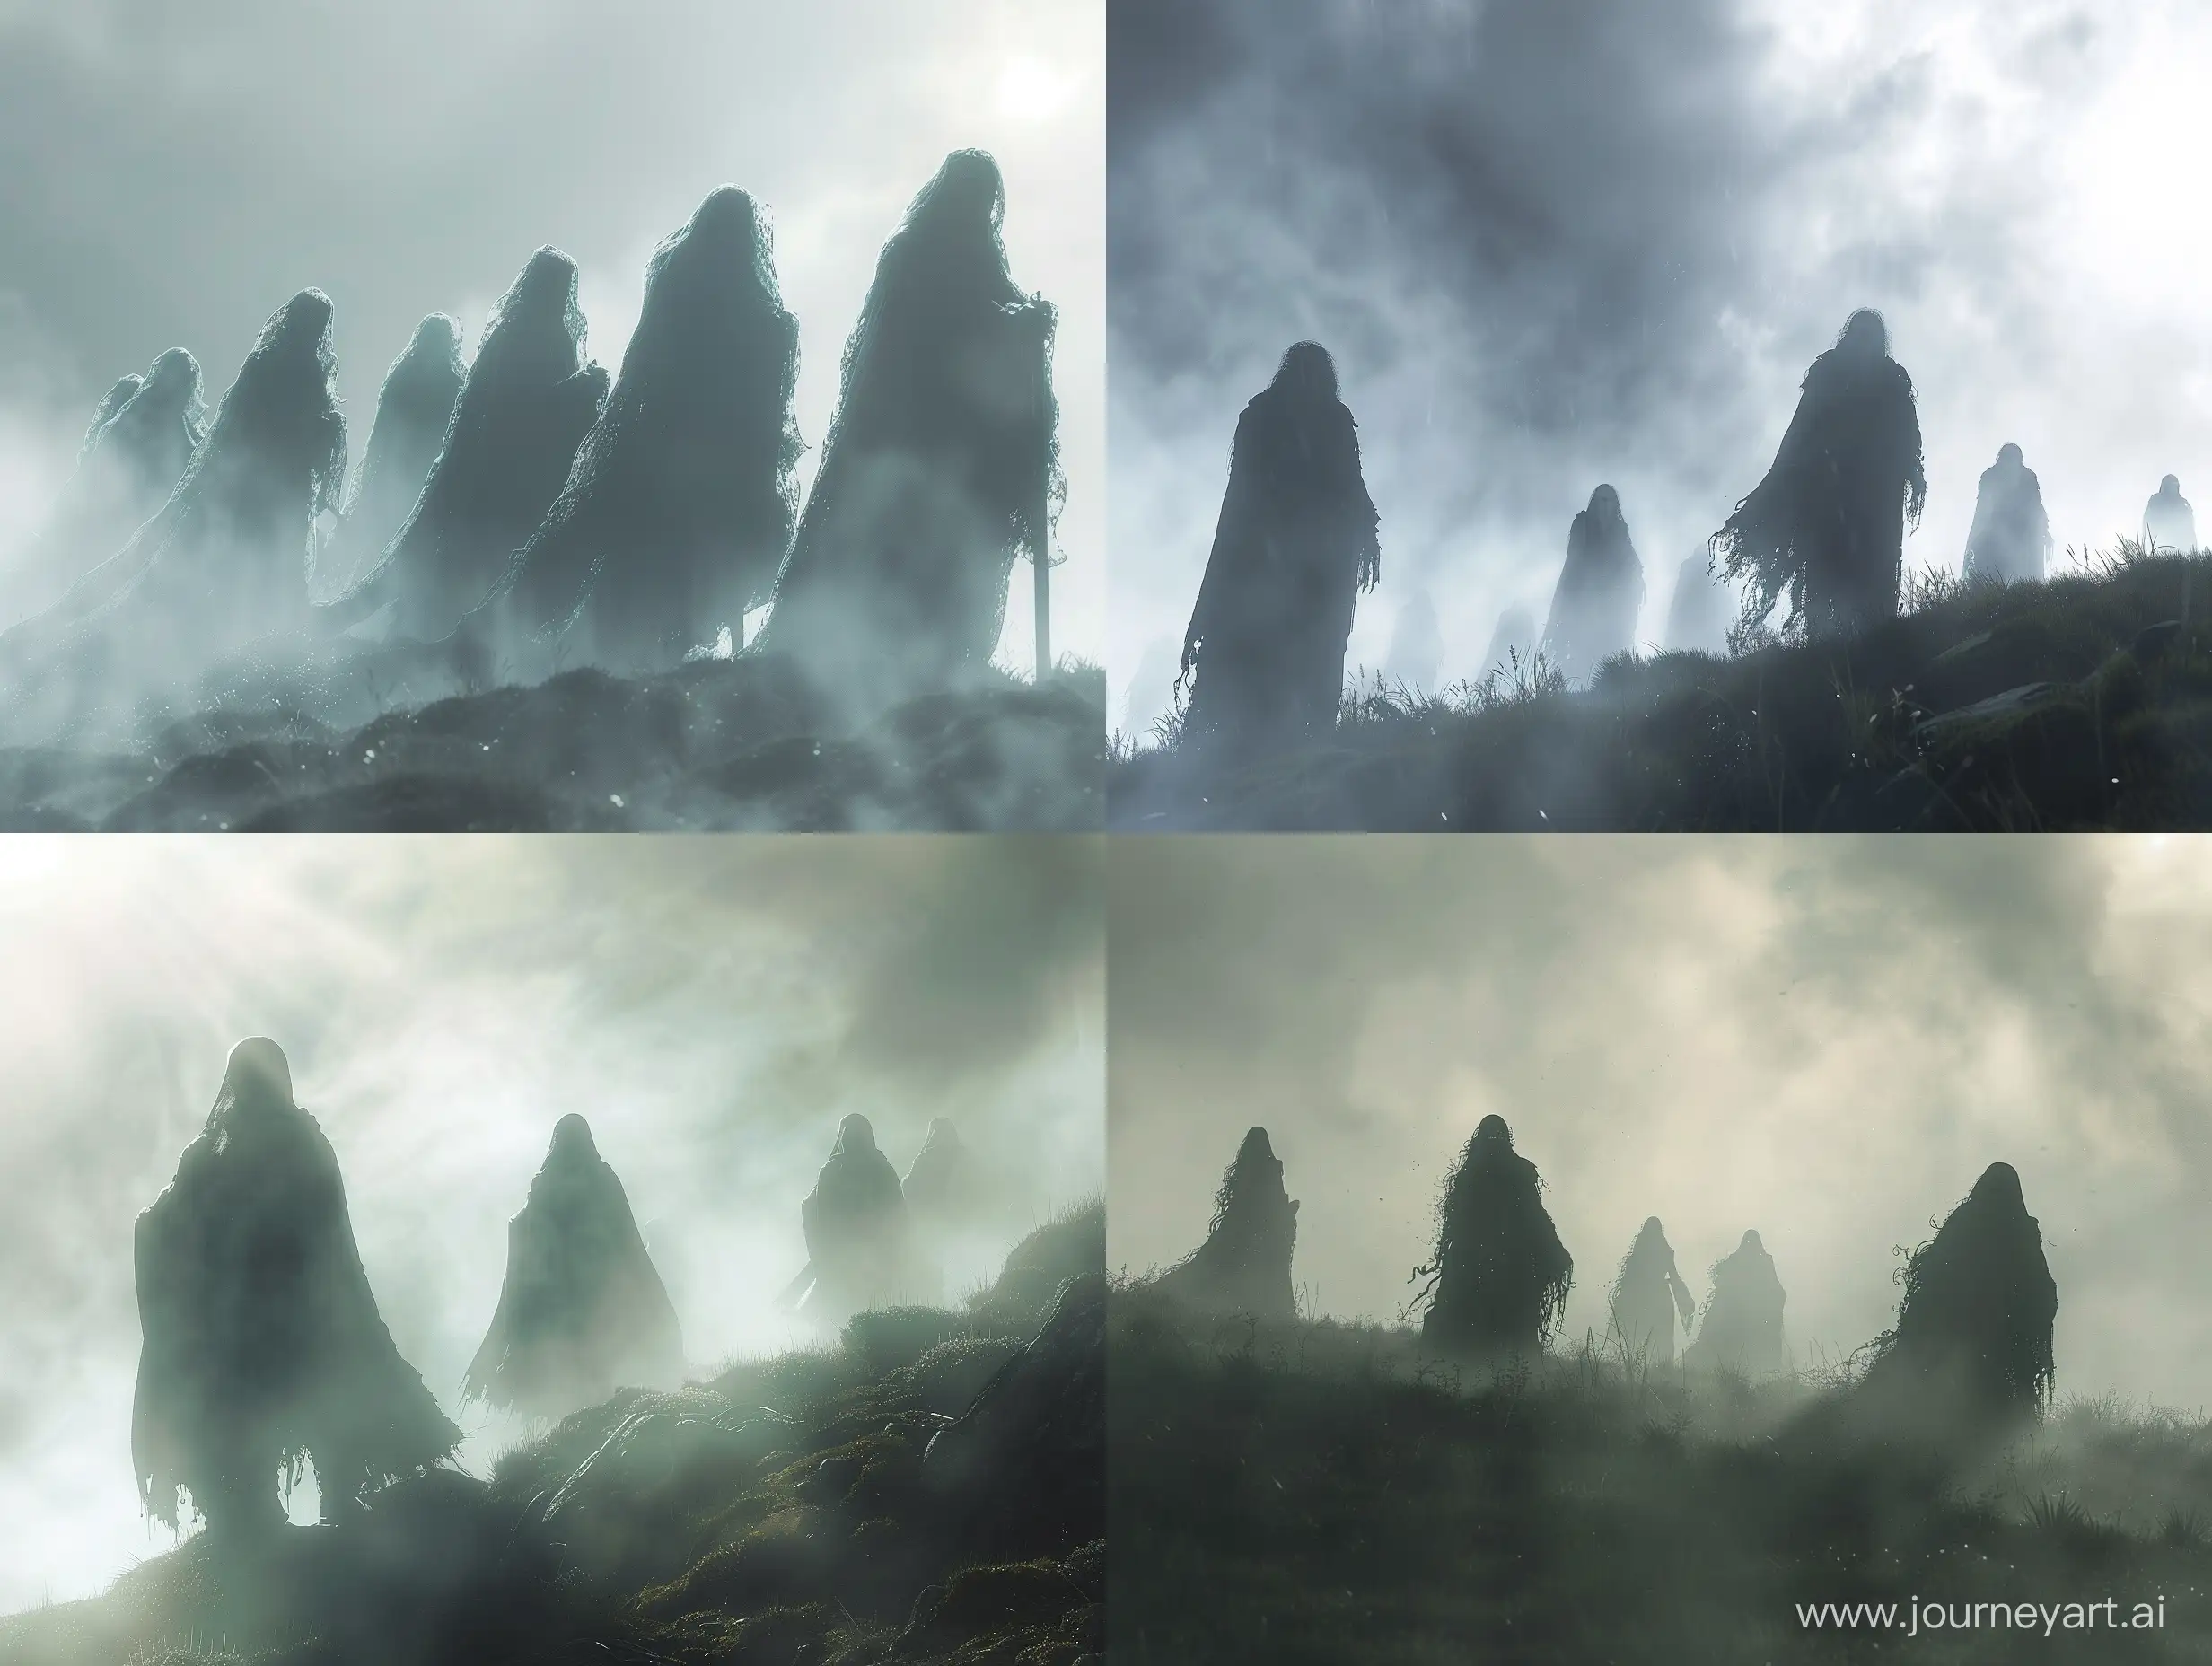 Ethereal-Wraiths-Emerging-from-Mist-in-Cinematic-Photonegative-Silhouette